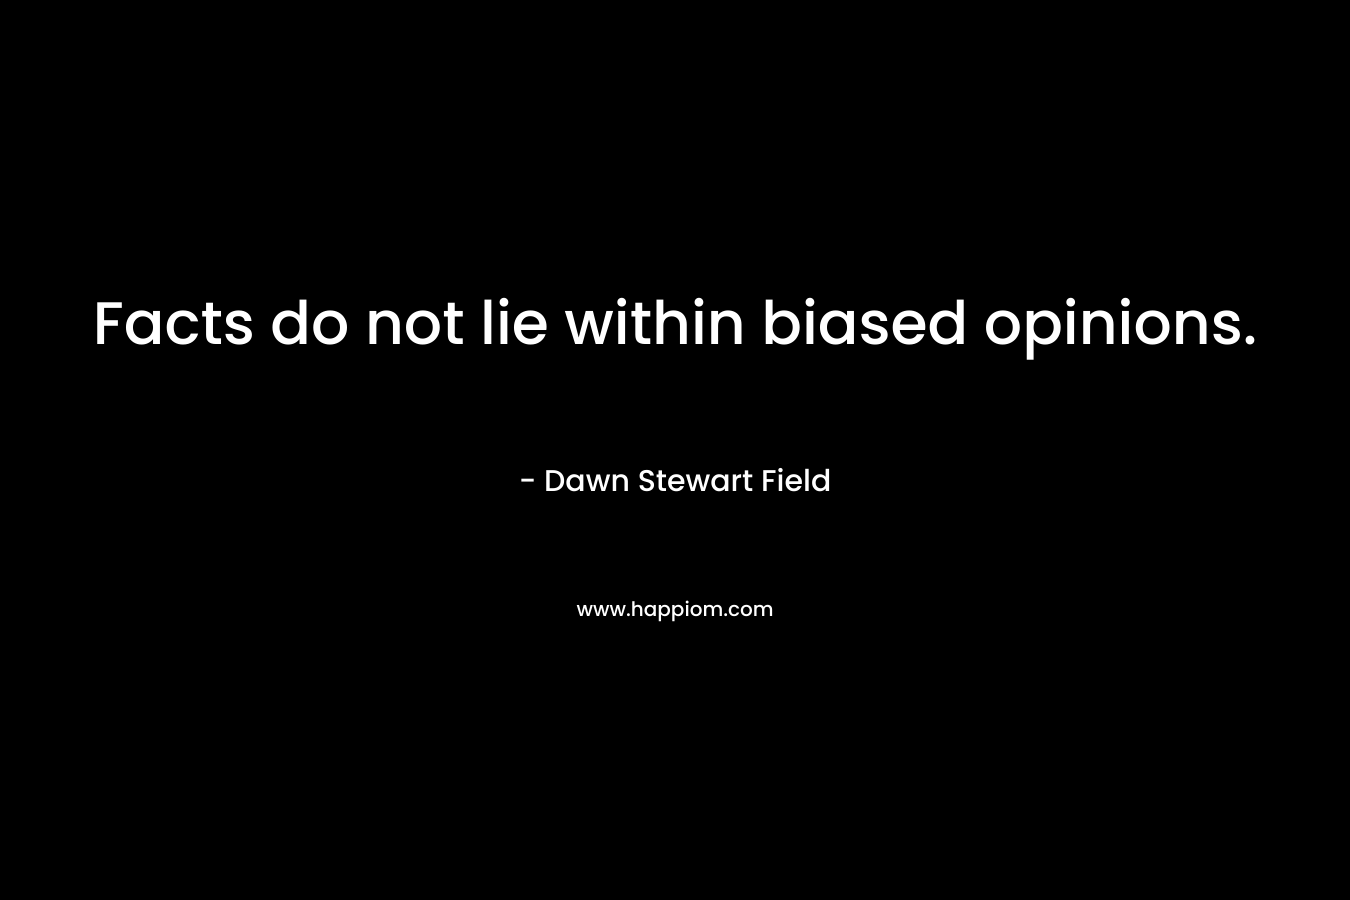 Facts do not lie within biased opinions. – Dawn Stewart Field